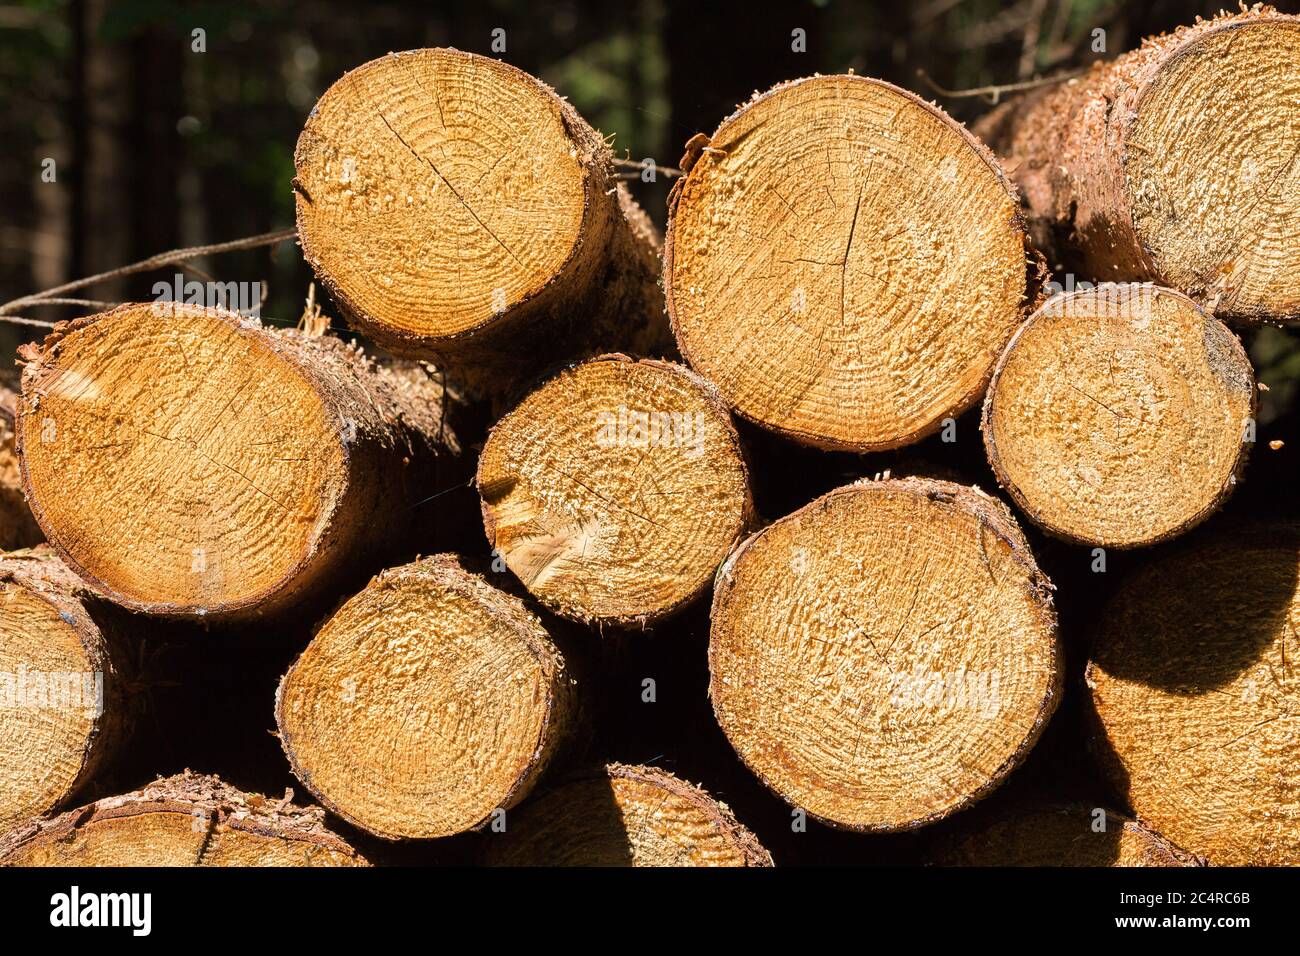 Close up on a stack of lumber / wooden logs. Symbol for forestry and wood industry. Stock Photo